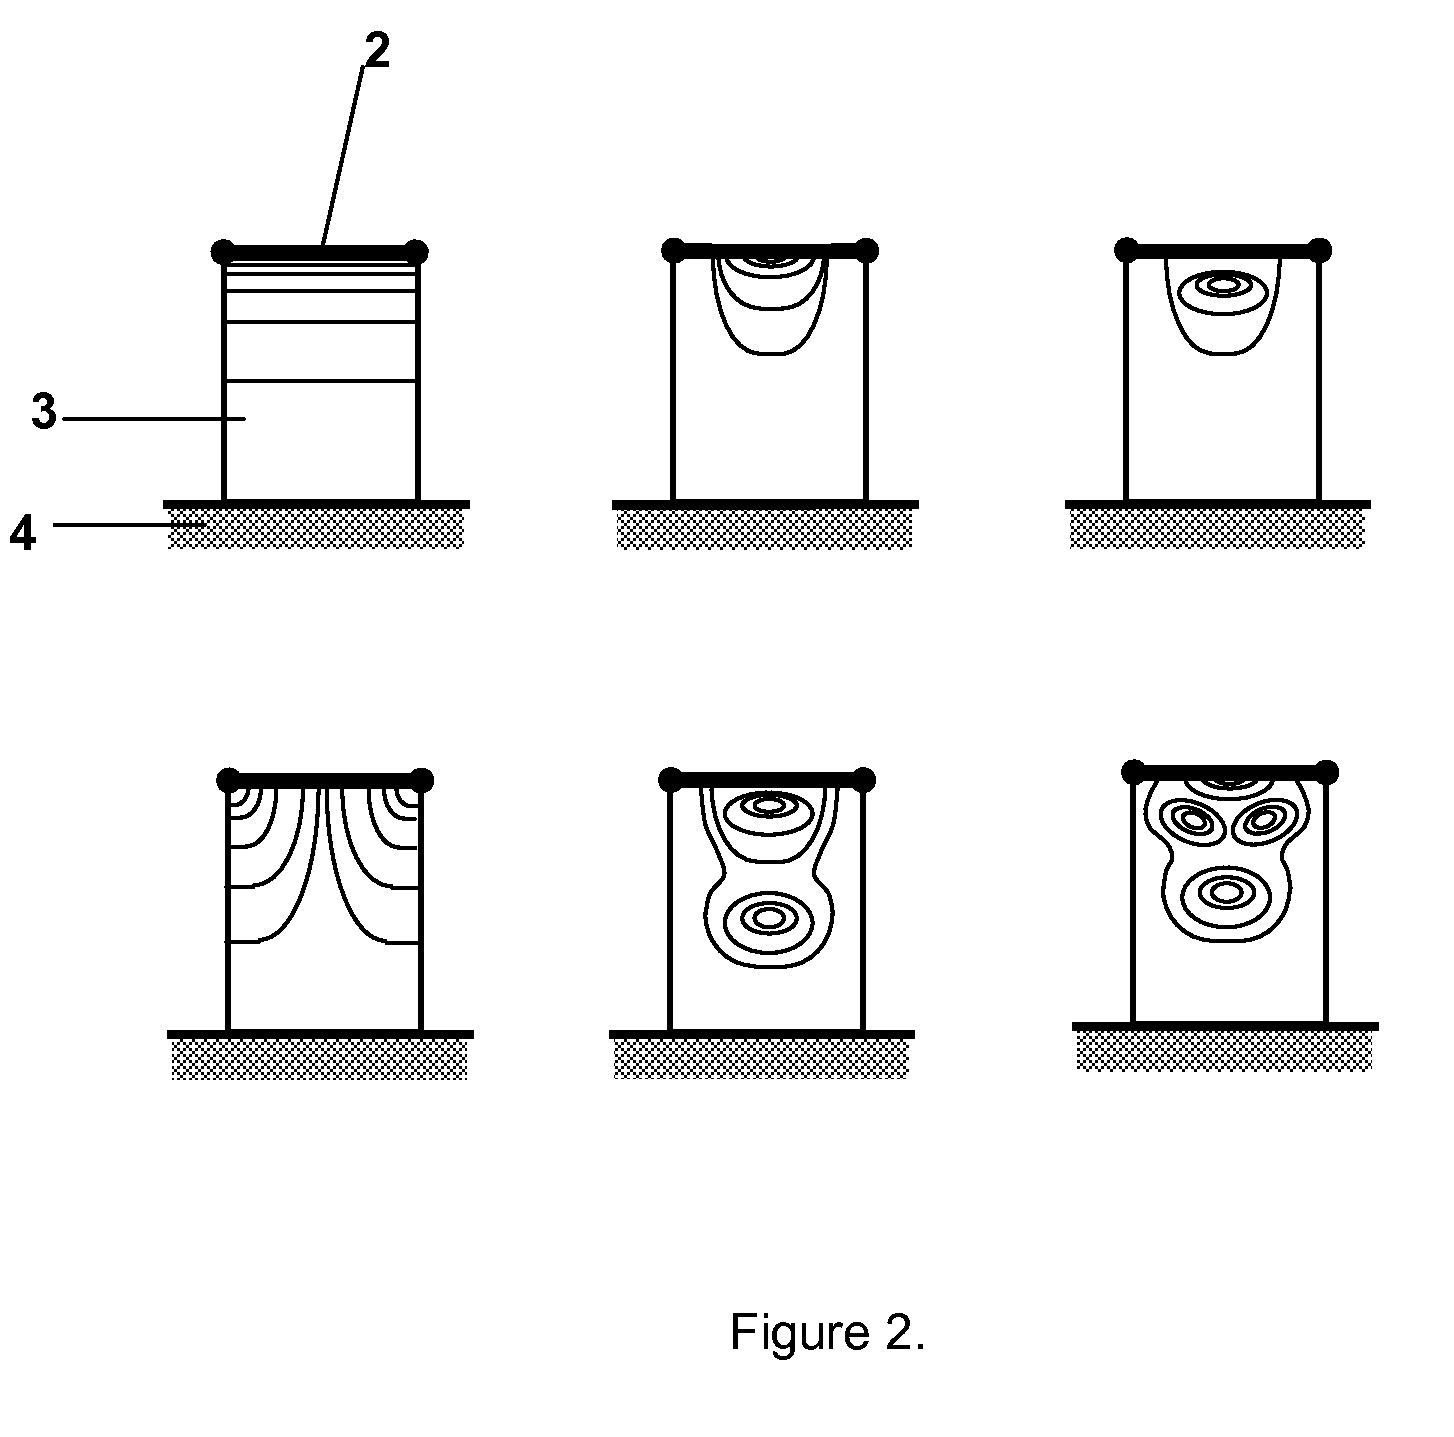 Apparatus for harvesting energy from flow-induced oscillations and method for the same